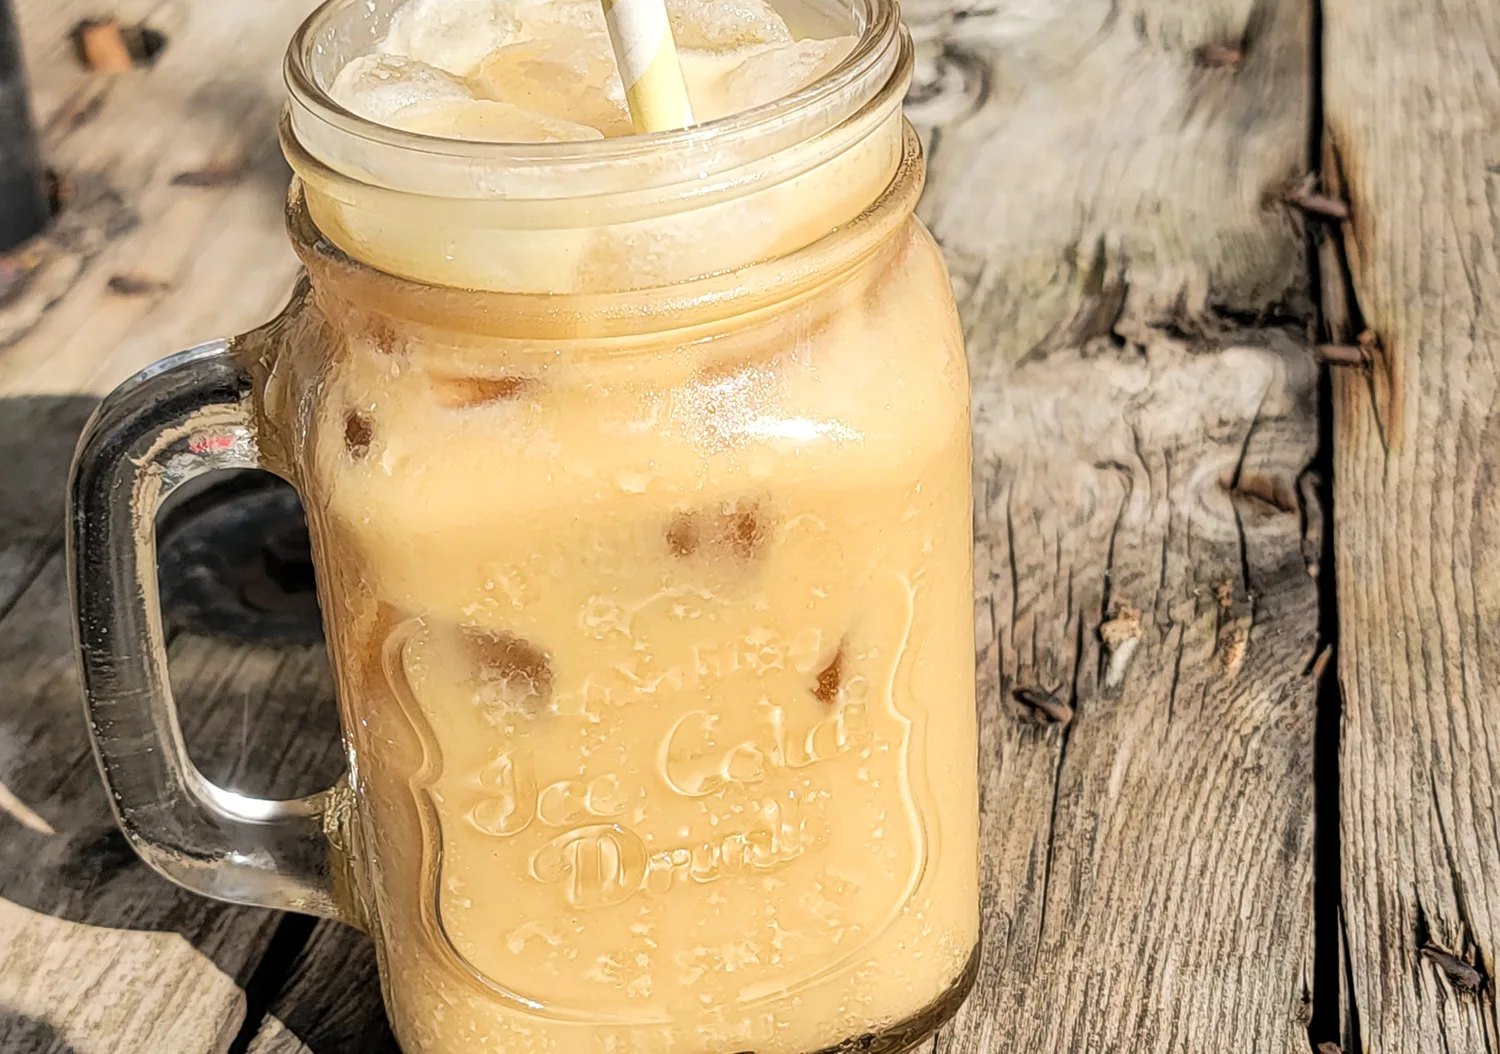 Ice Coffee with Low Carb Flavoring Recipe Mixed in